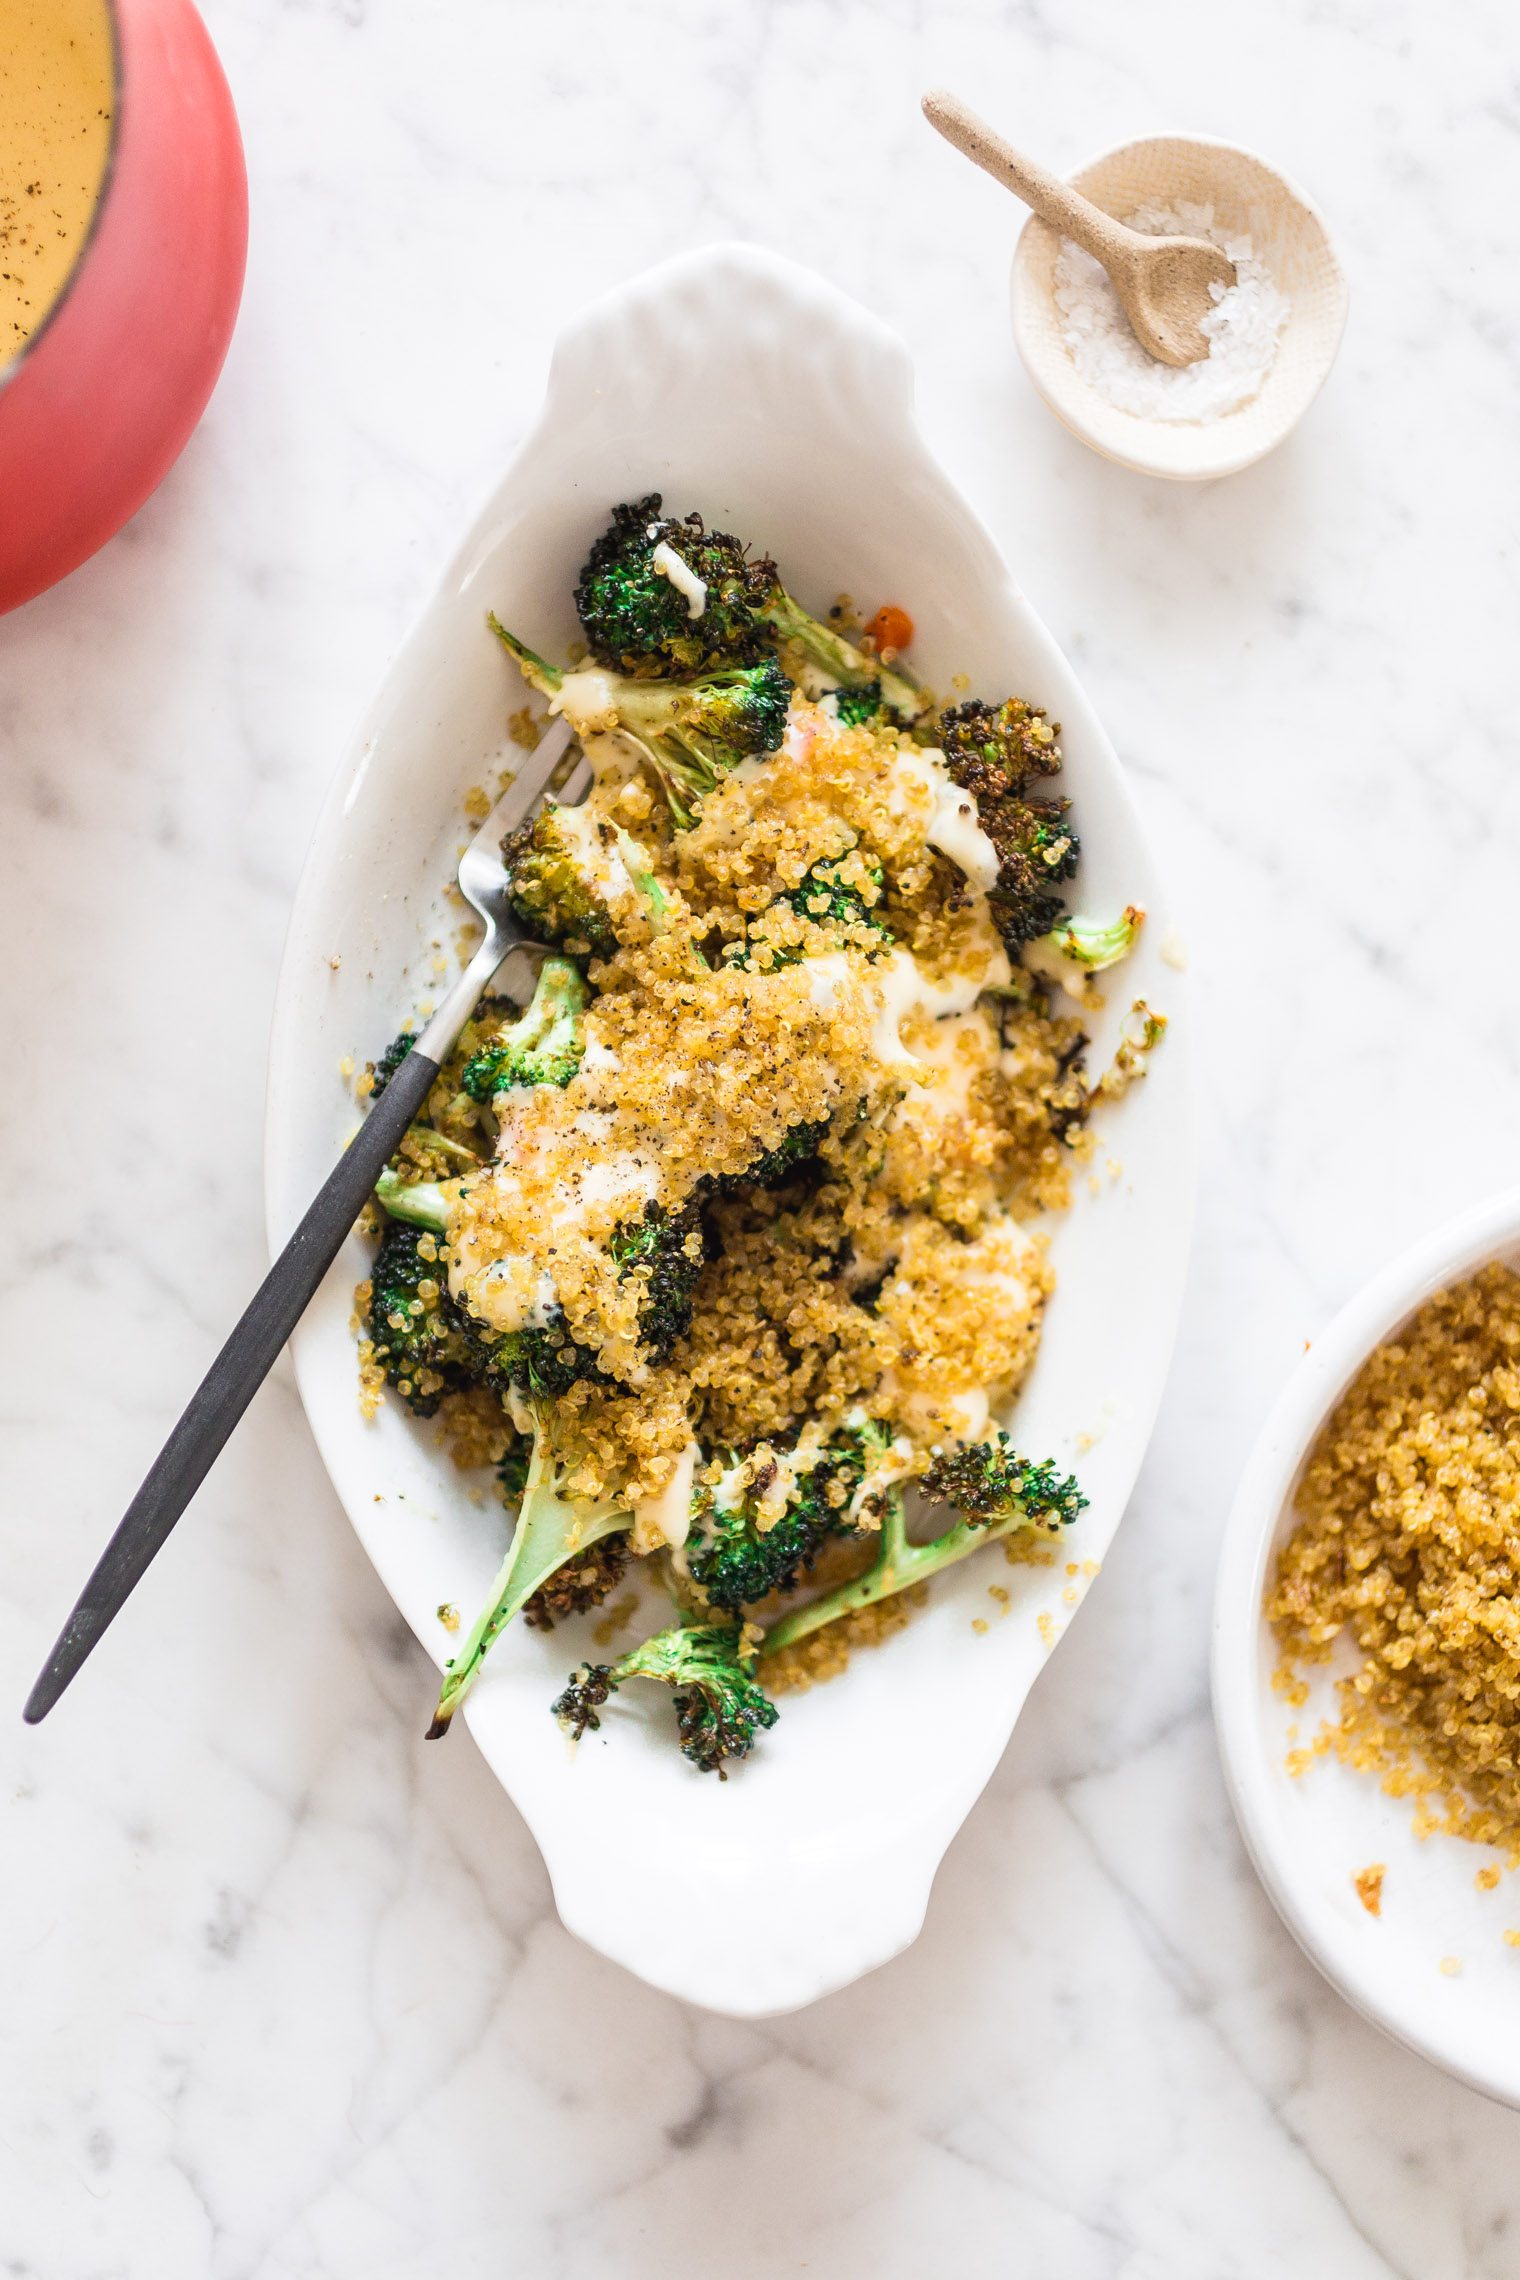 Roasted Broccoli and Cheddar with Crispy Quinoa